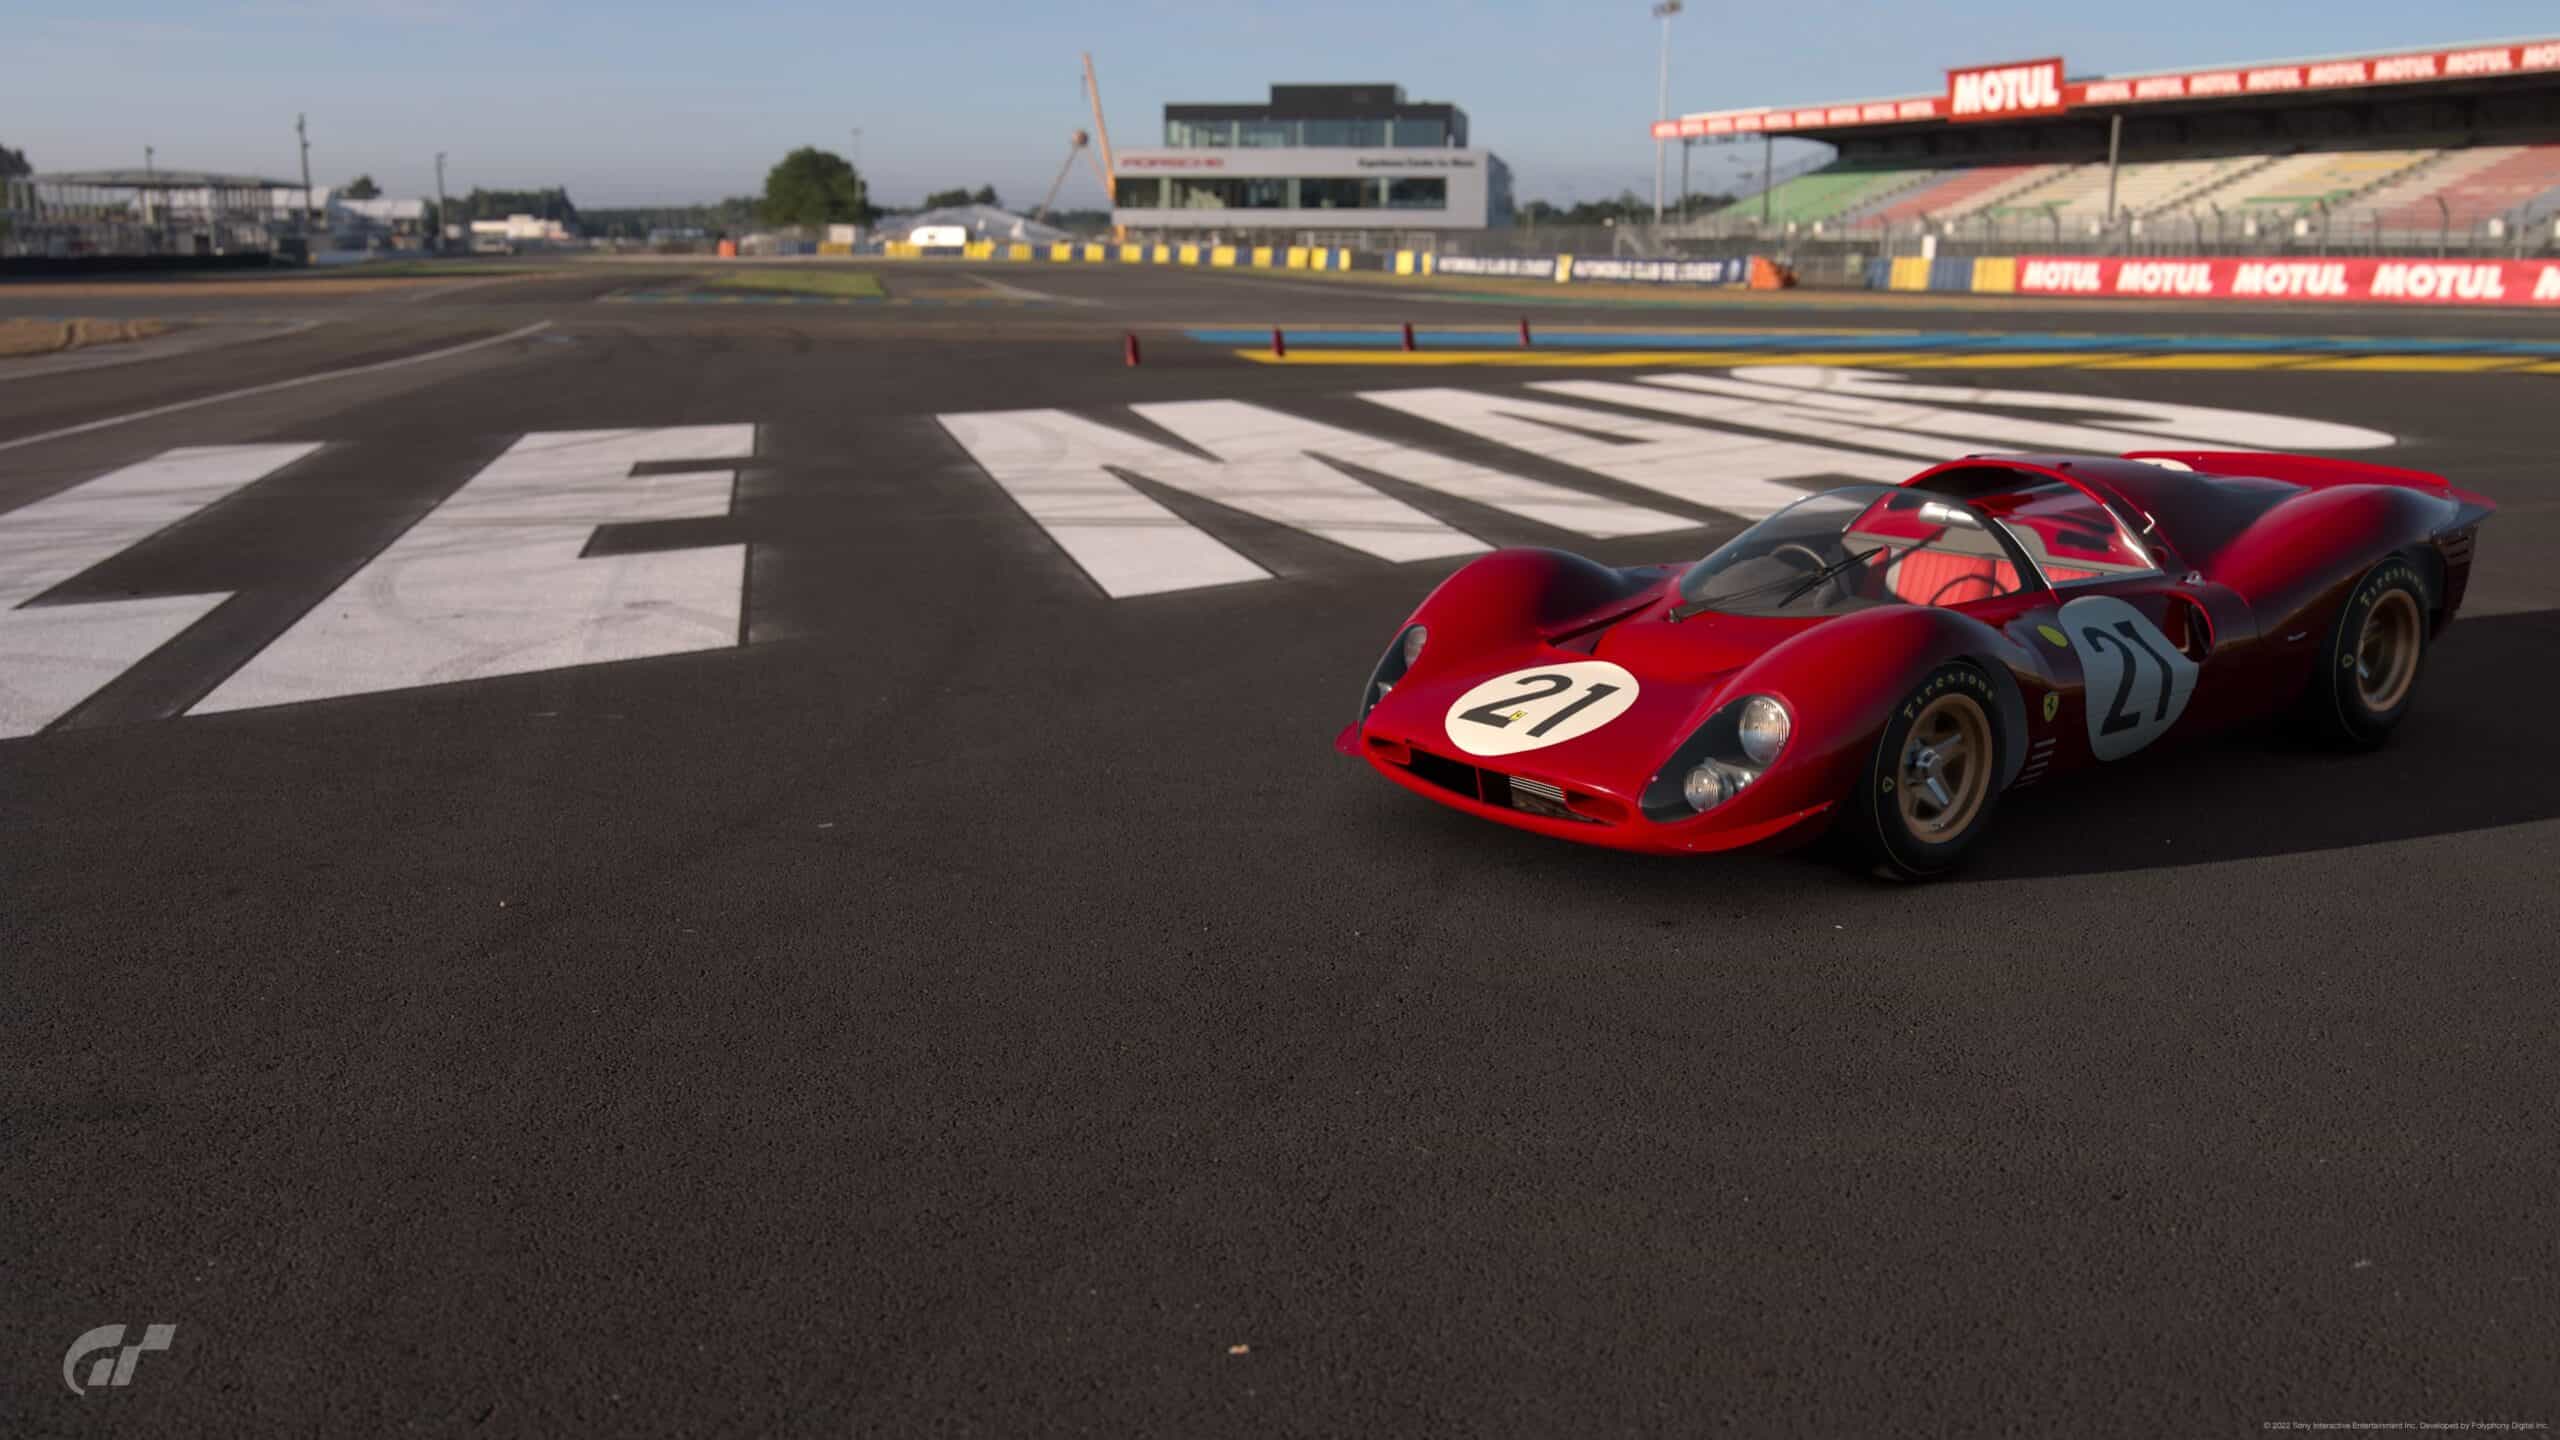 Vintage race cars have to be my favorite type of cars to drive in this game  : r/granturismo